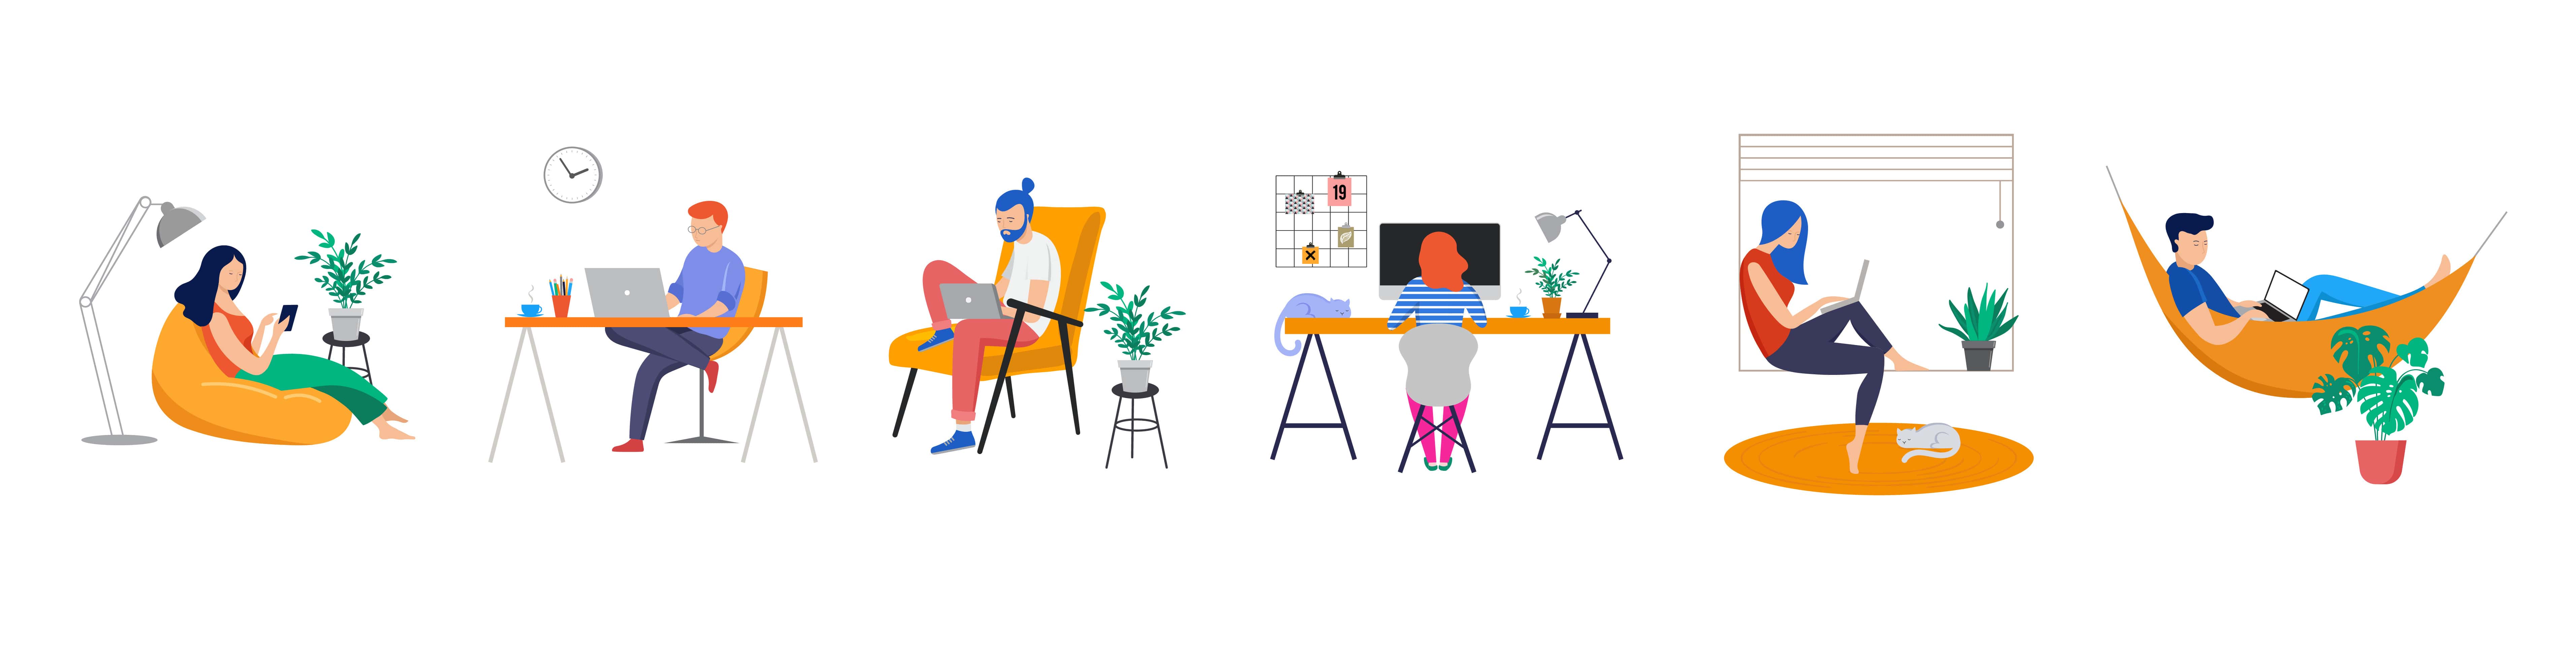 Illustration of Different People Working in Their Home Offices